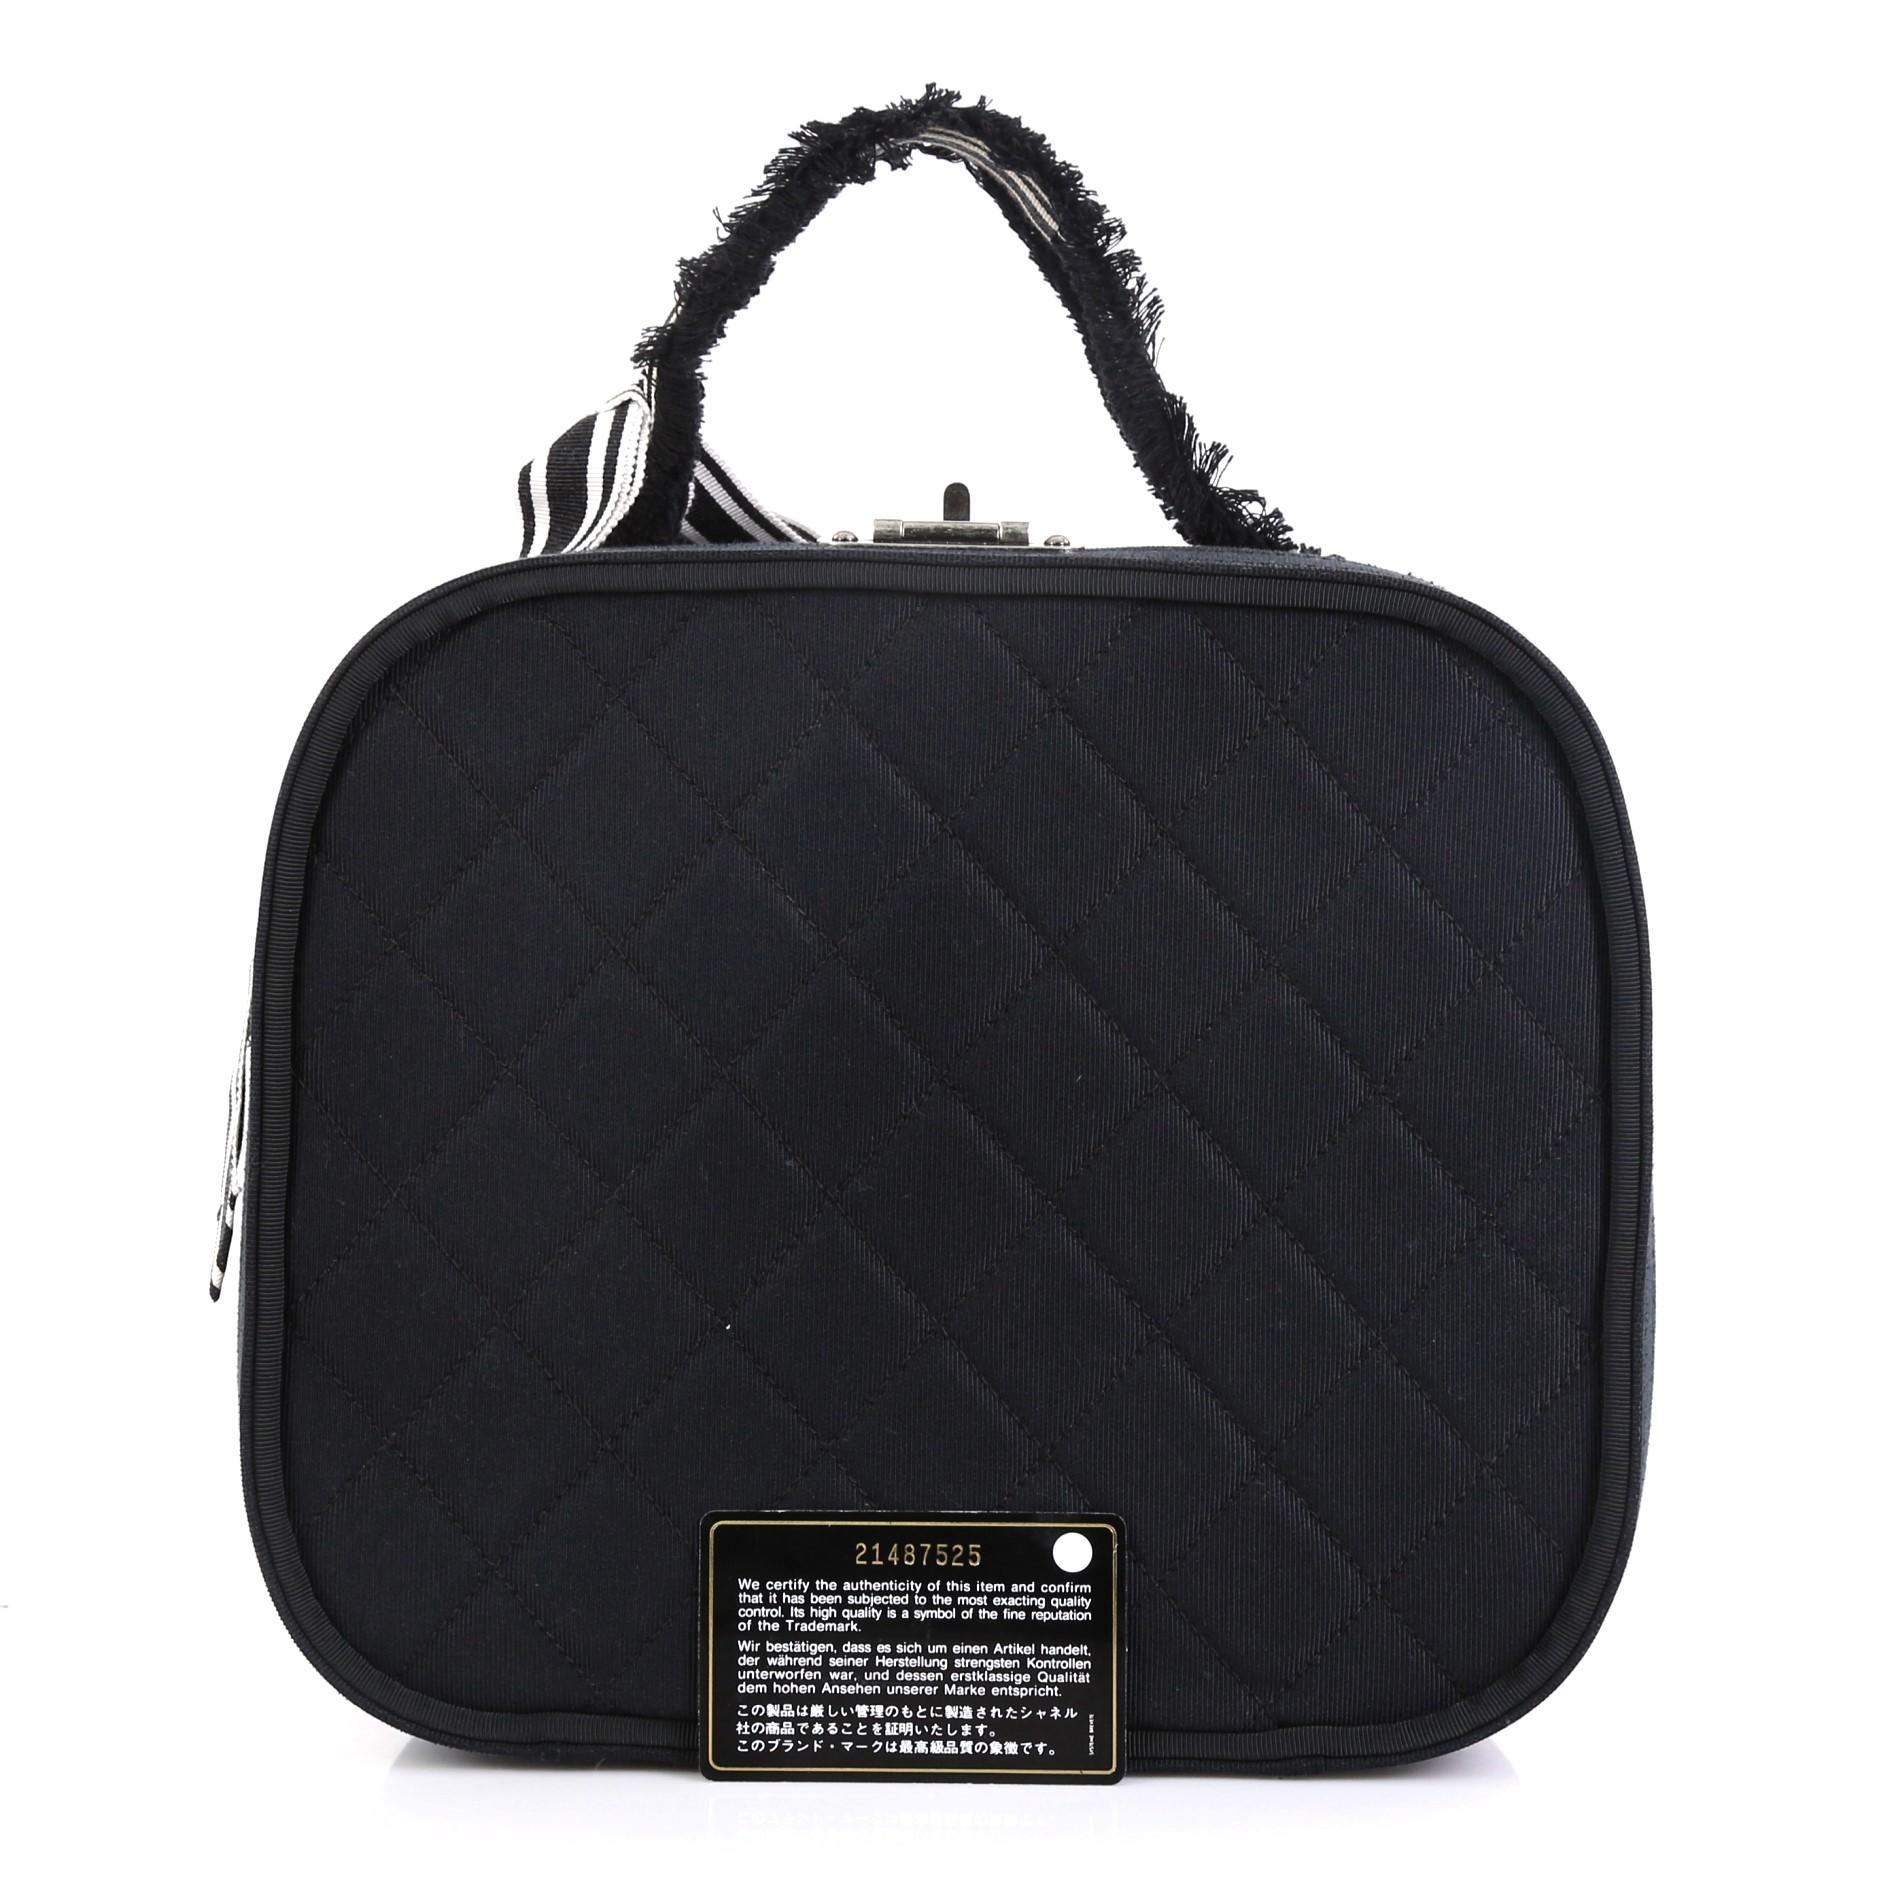 This Chanel Ribbon Vanity Case Quilted Grosgrain Medium, crafted from black quilted grosgrain, features a top handle and aged silver-tone hardware. It opens to a black microfiber interior. Hologram sticker reads: 21487525. 

Condition: Great. Marks